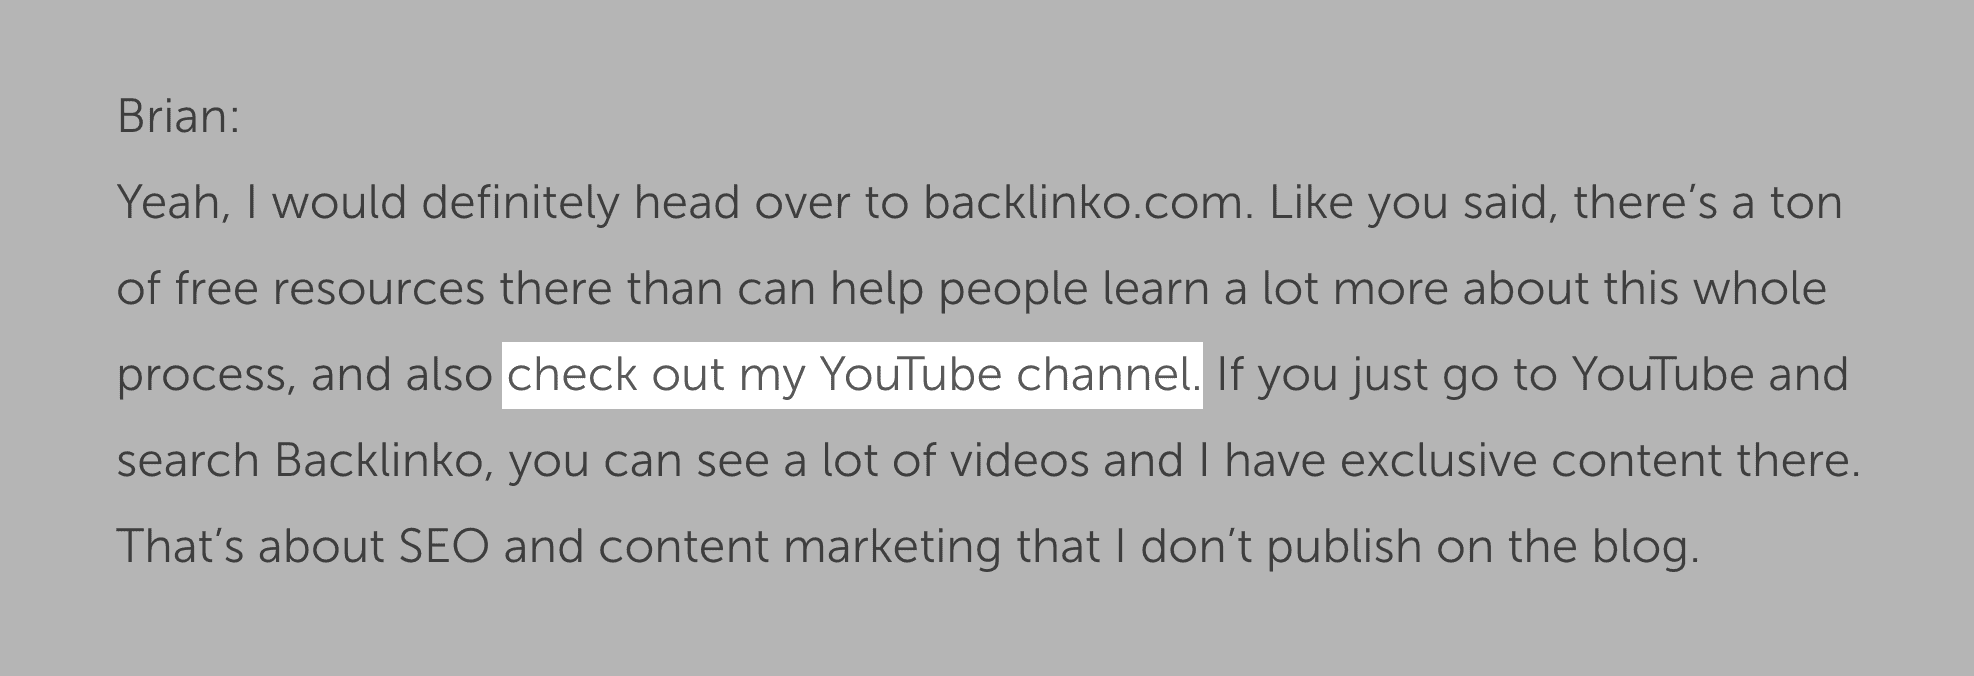 Brian promotes the Backlinko YouTube channel in podcast interviews